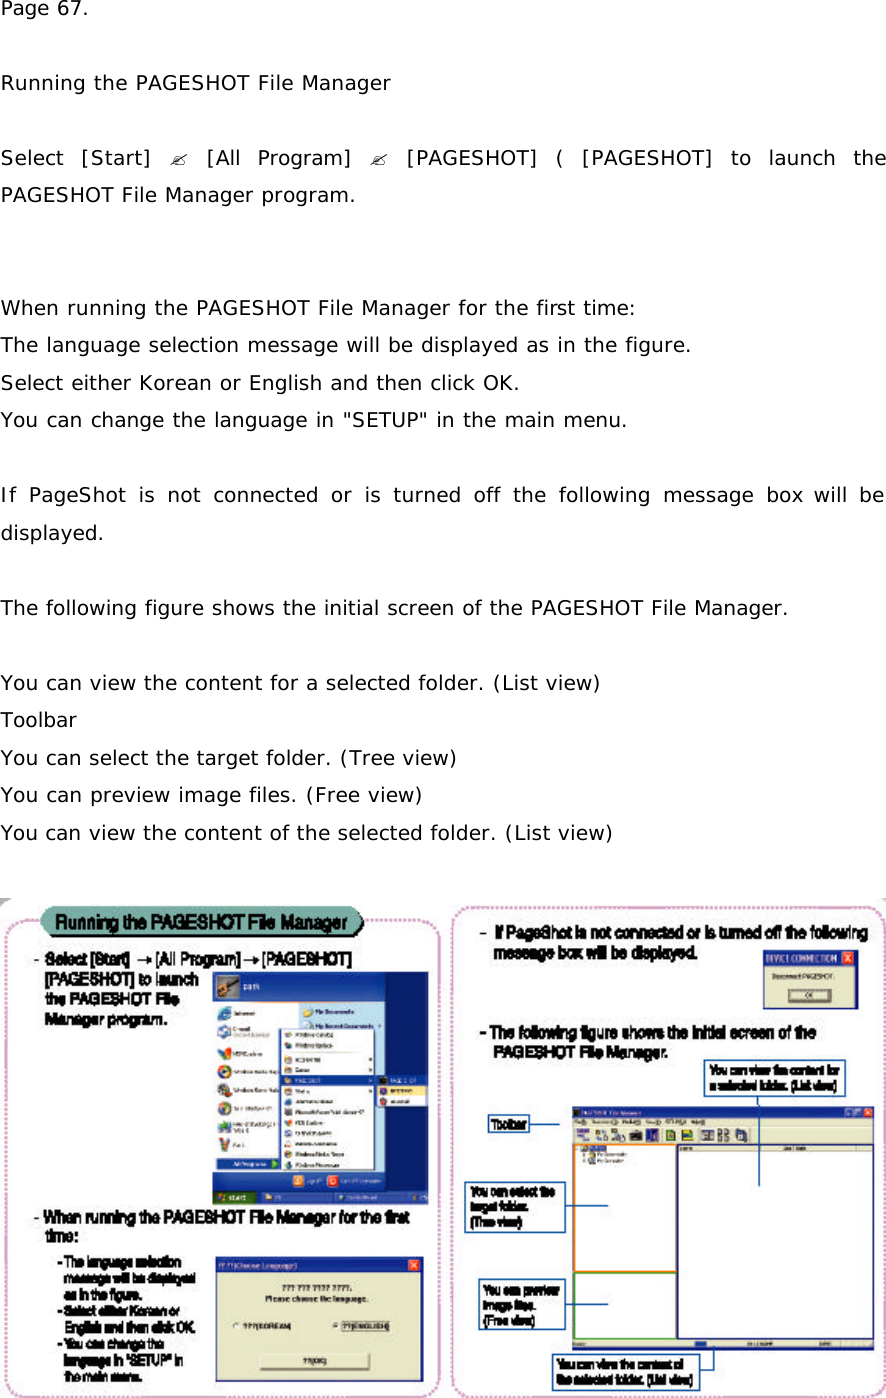 Page 67.  Running the PAGESHOT File Manager  Select [Start] ? [All Program] ? [PAGESHOT] ( [PAGESHOT] to launch the PAGESHOT File Manager program.   When running the PAGESHOT File Manager for the first time: The language selection message will be displayed as in the figure. Select either Korean or English and then click OK. You can change the language in &quot;SETUP&quot; in the main menu.  If PageShot is not connected or is turned off the following message box will be displayed.  The following figure shows the initial screen of the PAGESHOT File Manager.   You can view the content for a selected folder. (List view) Toolbar You can select the target folder. (Tree view) You can preview image files. (Free view) You can view the content of the selected folder. (List view)  